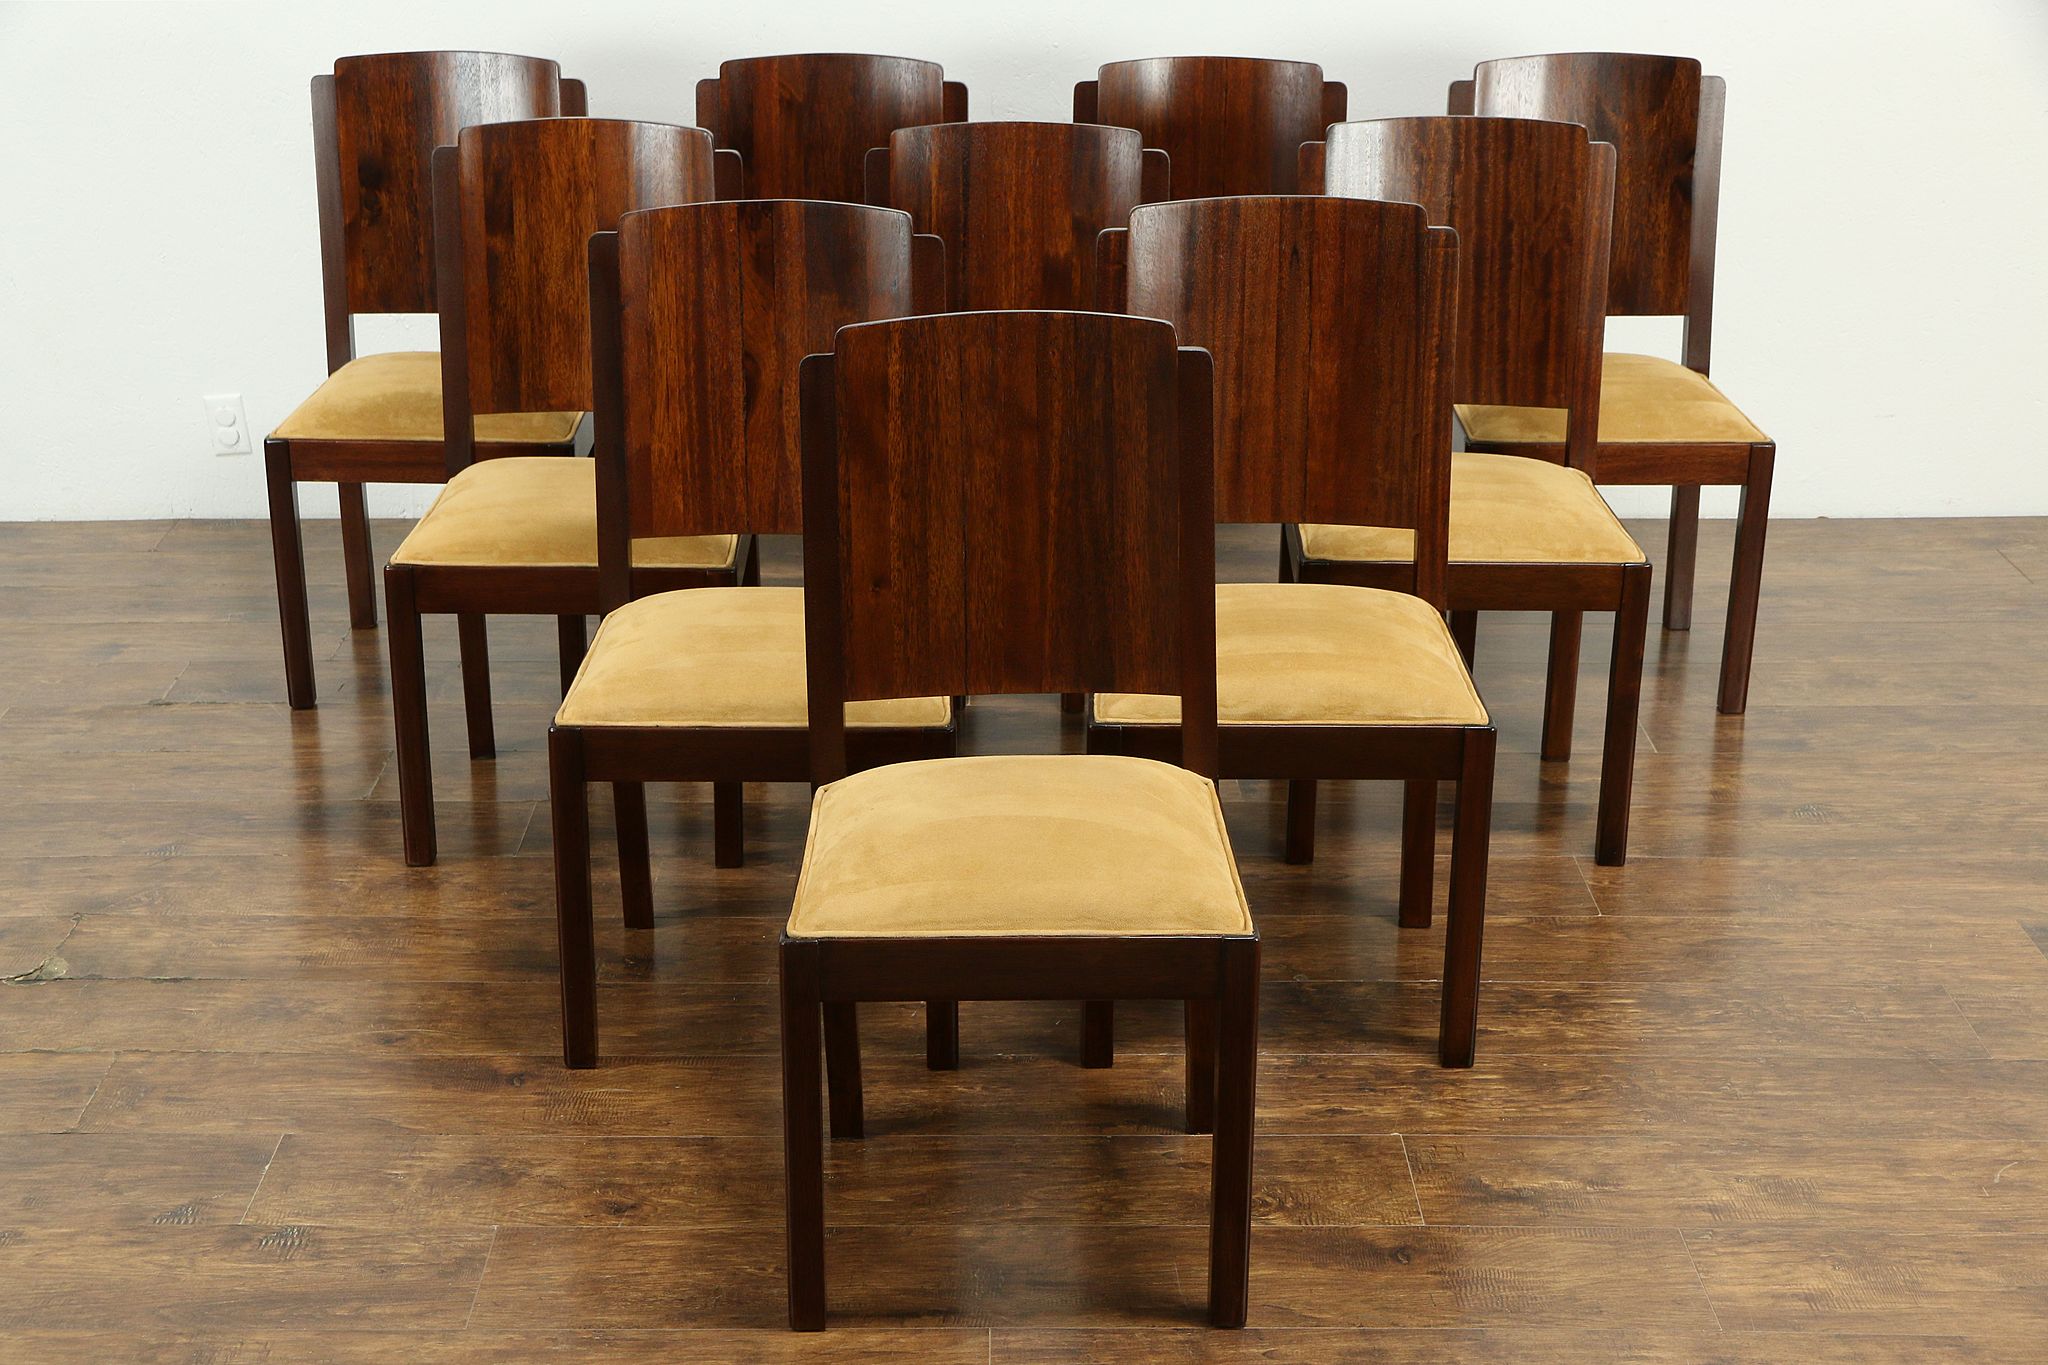 Sold Set Of 10 Italian Art Deco Dining Chairs Mahogany Faux Suede 33166 Harp Gallery Antiques Furniture